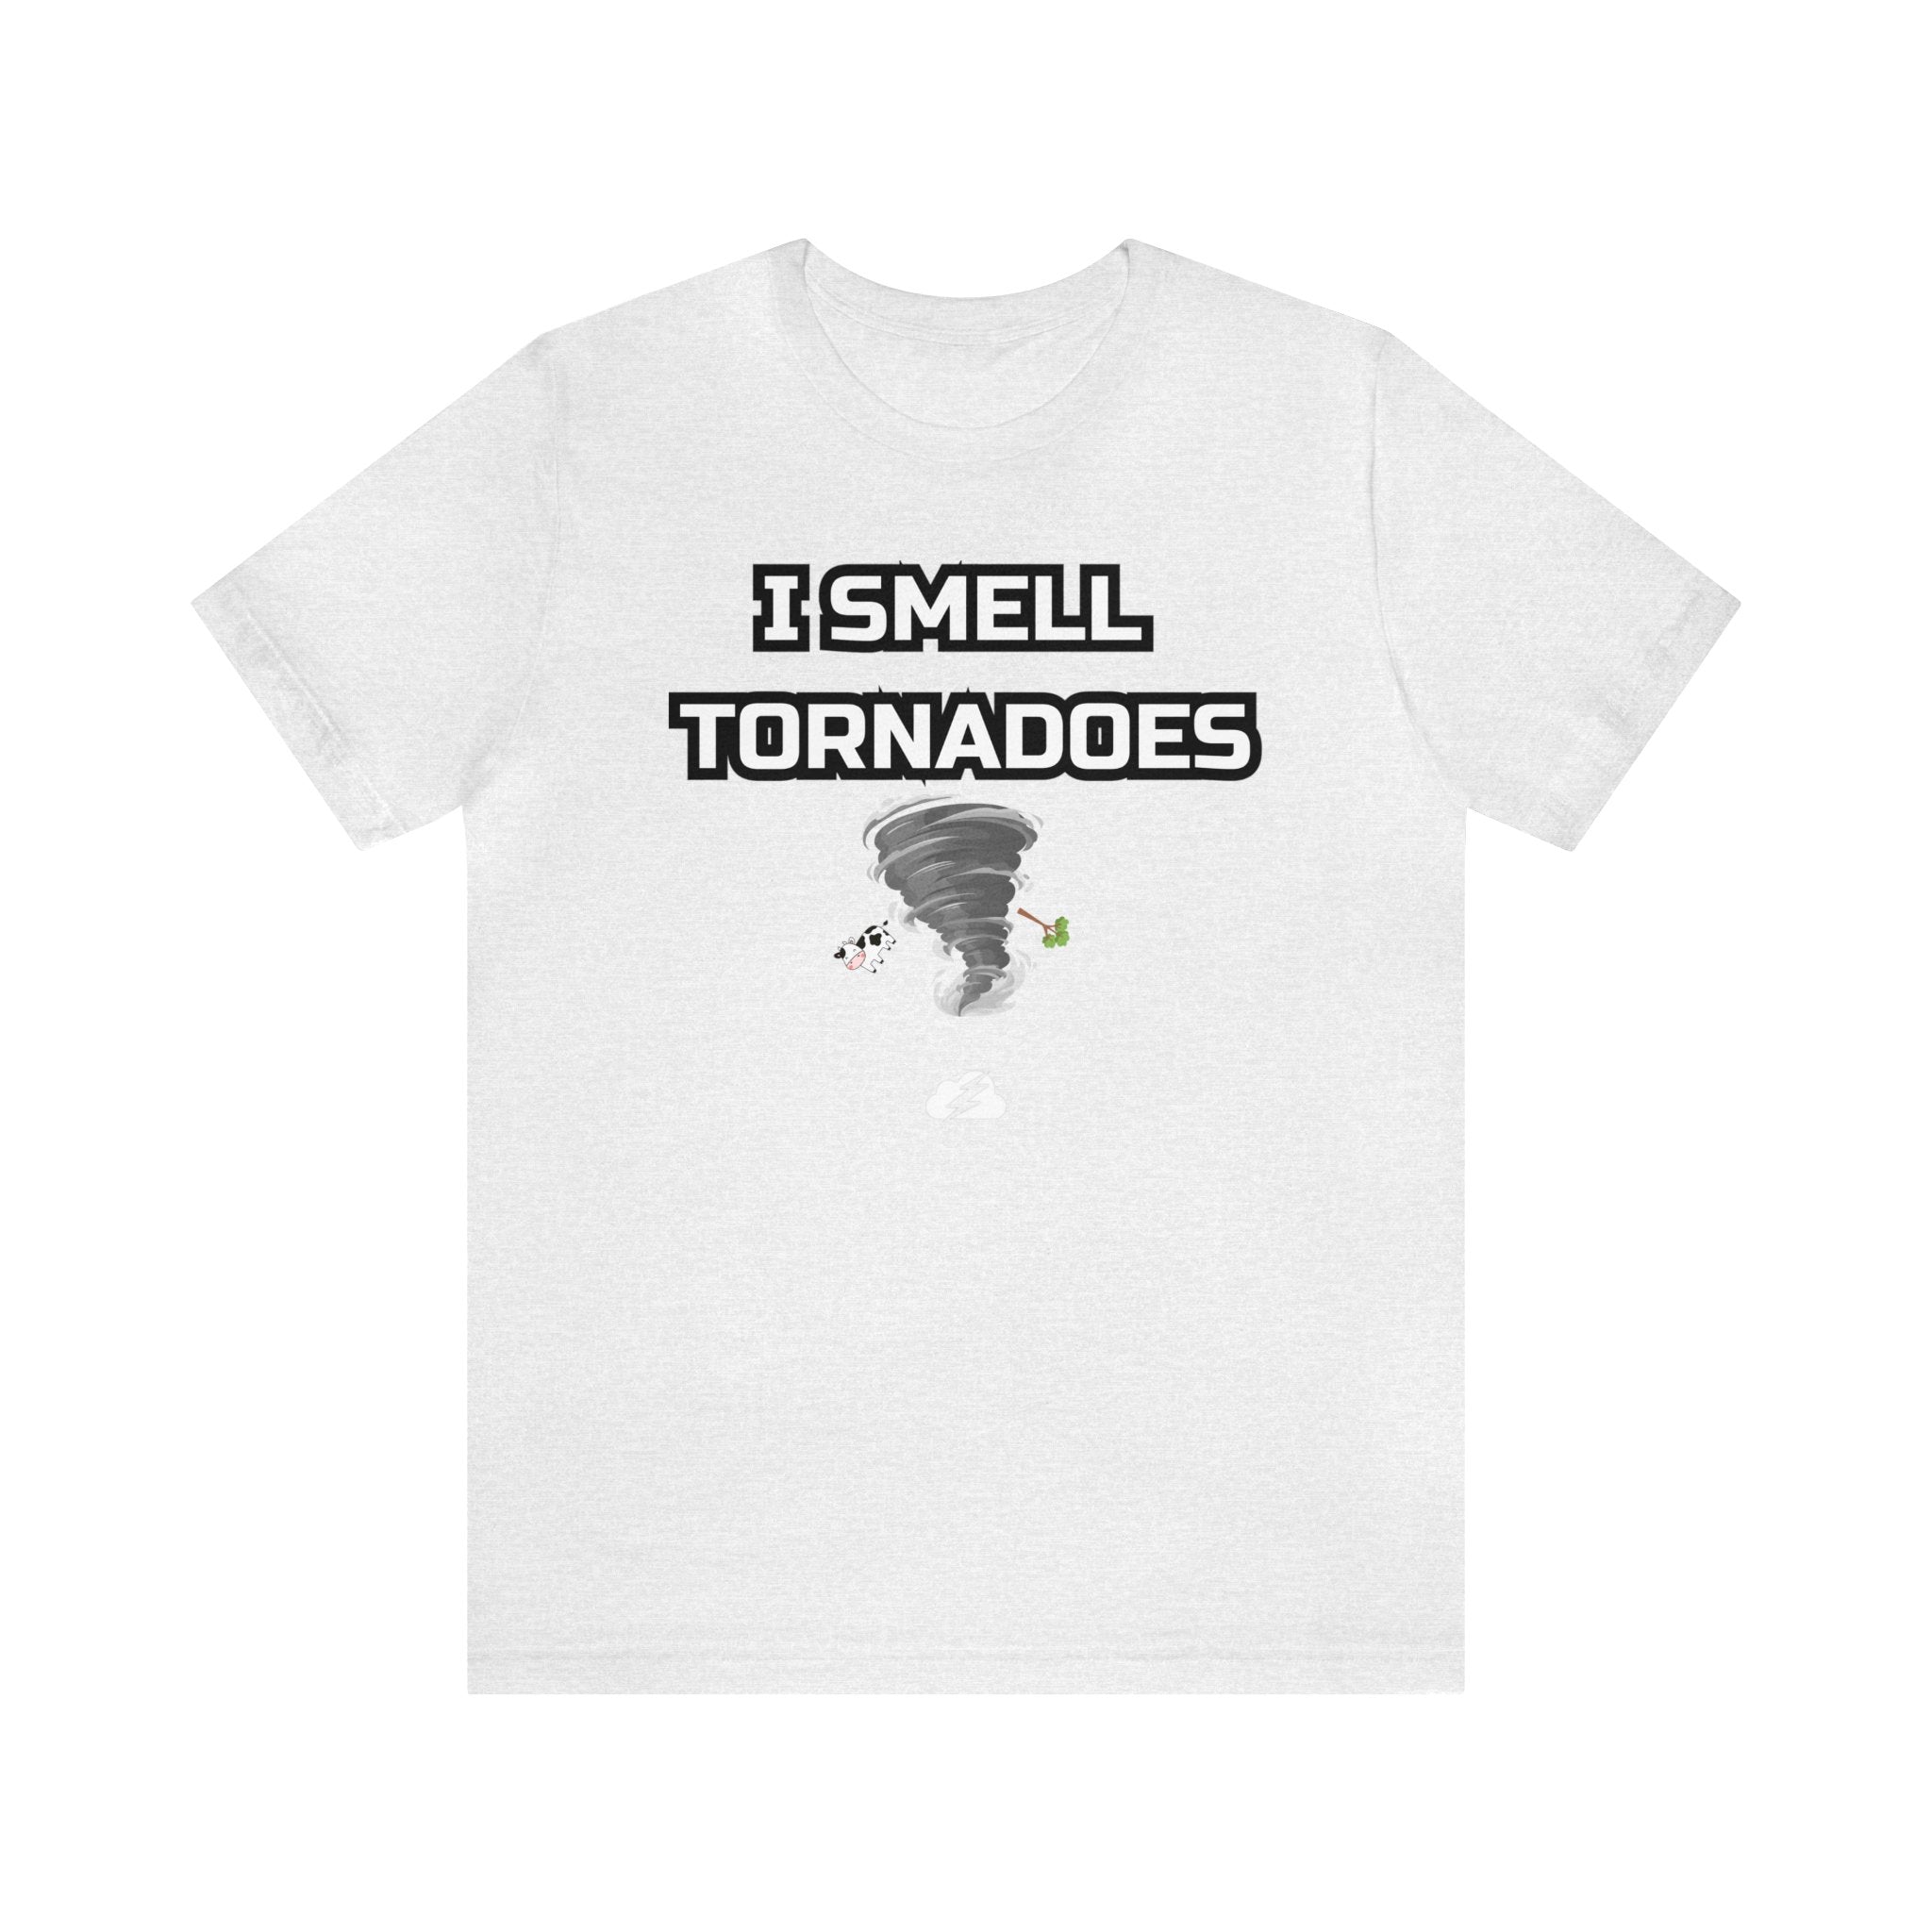 I Smell Tornadoes Tee 